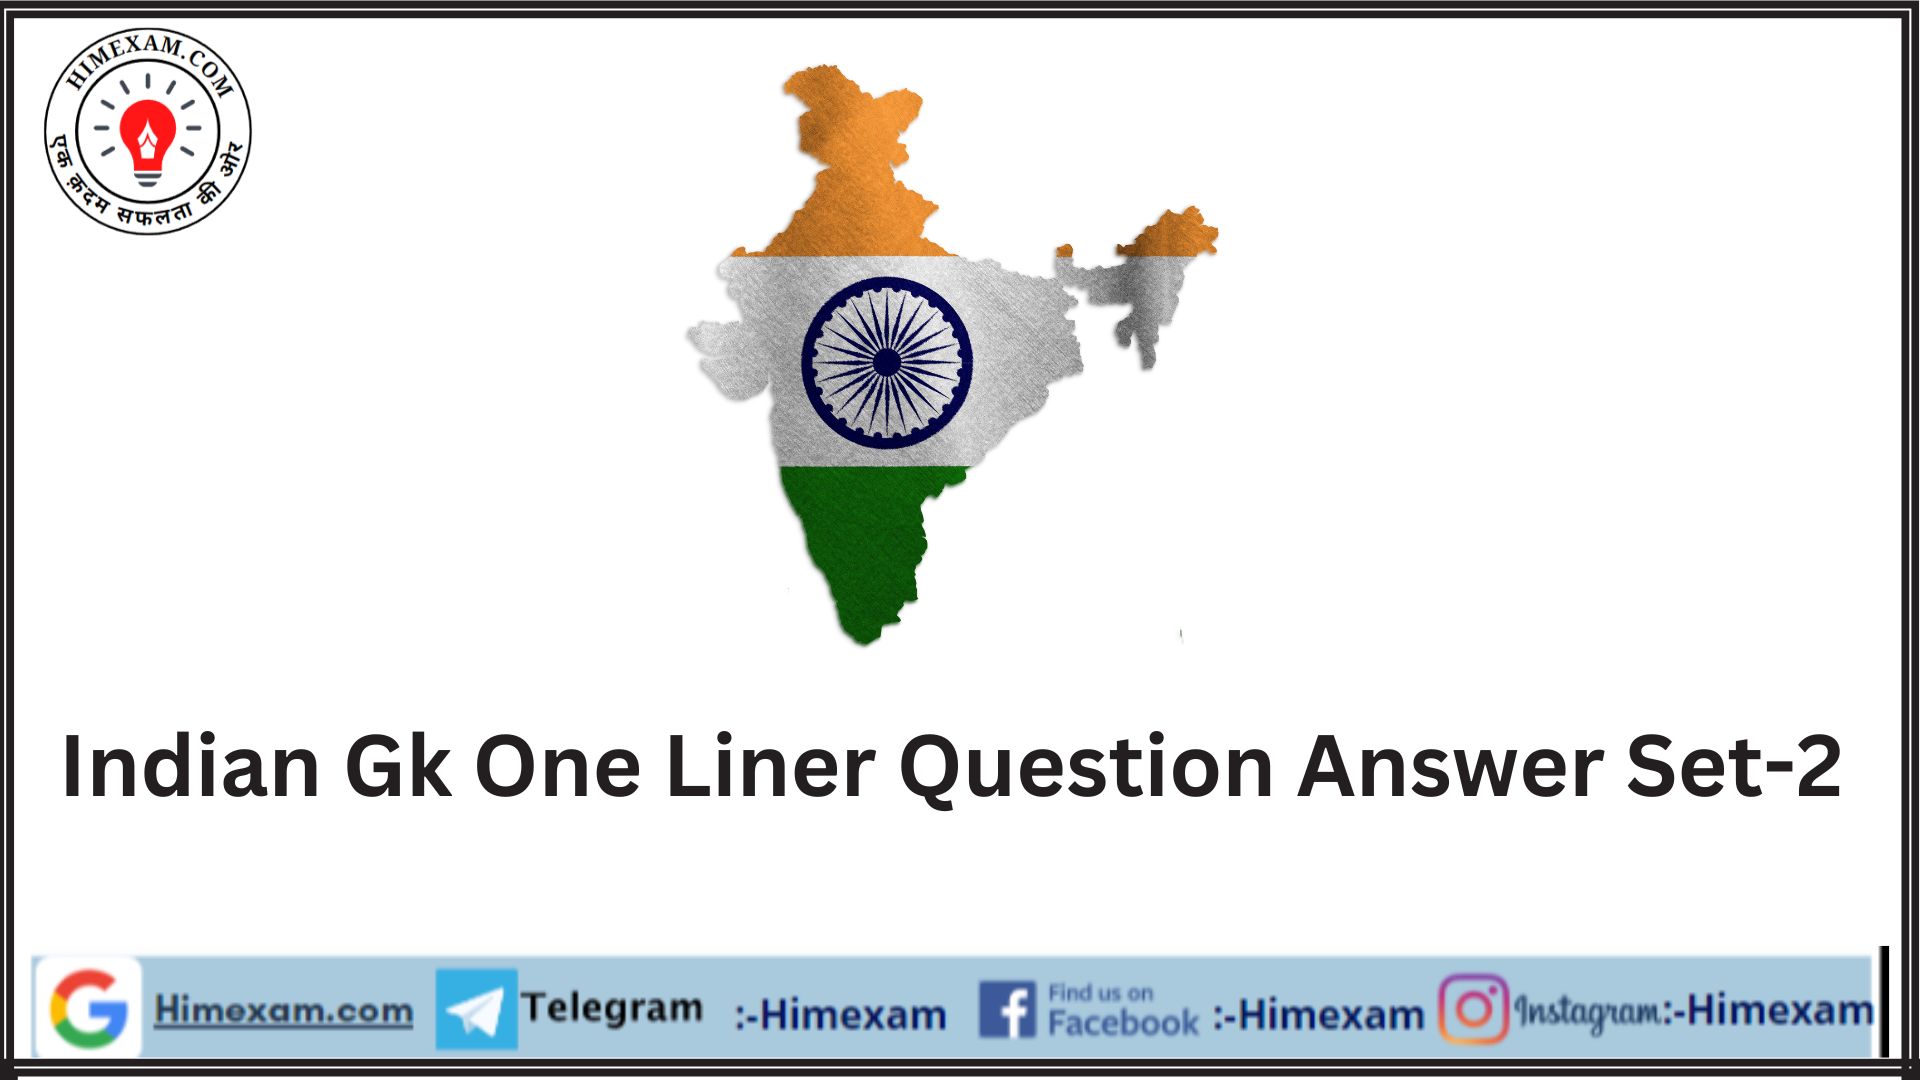 Indian Gk One Liner Question Answer Set-2